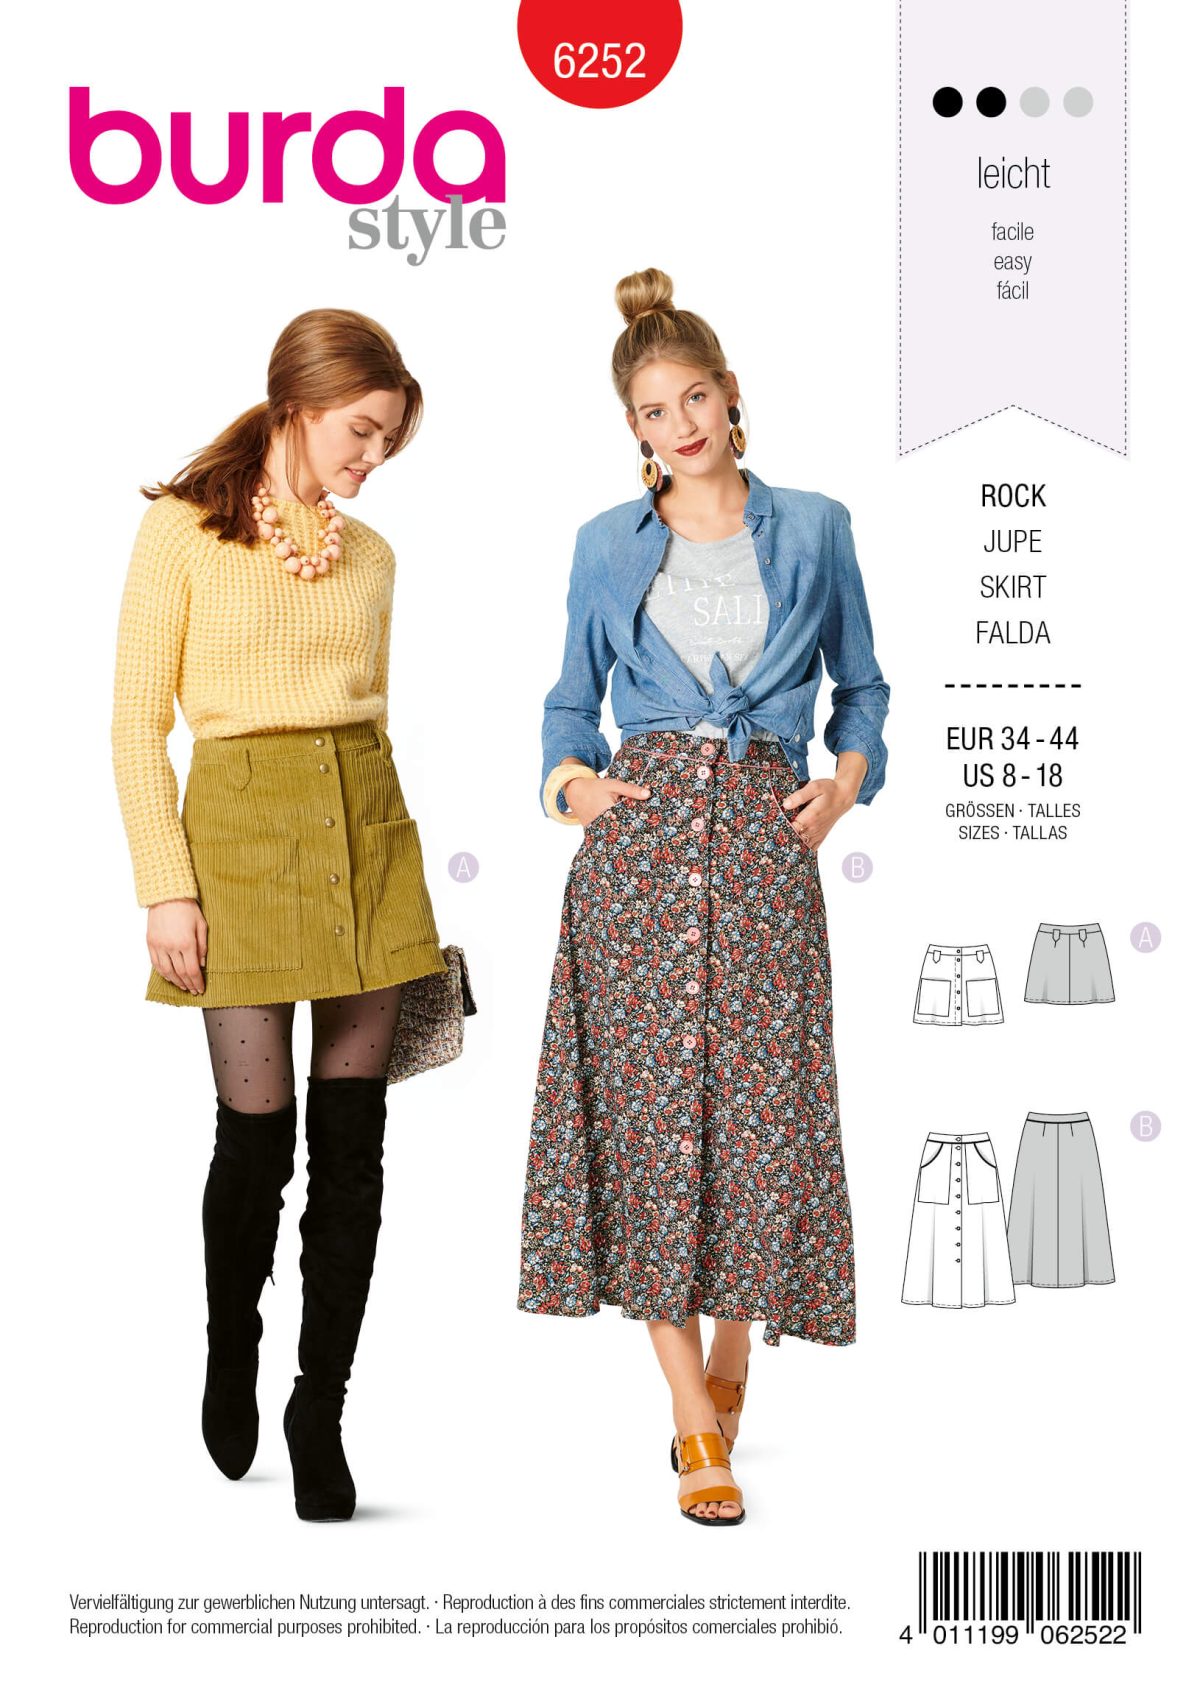 Burda Style Pattern 6252 Misses' Skirts, Front Fastening, Mini or Midi Length with Pocket Variations